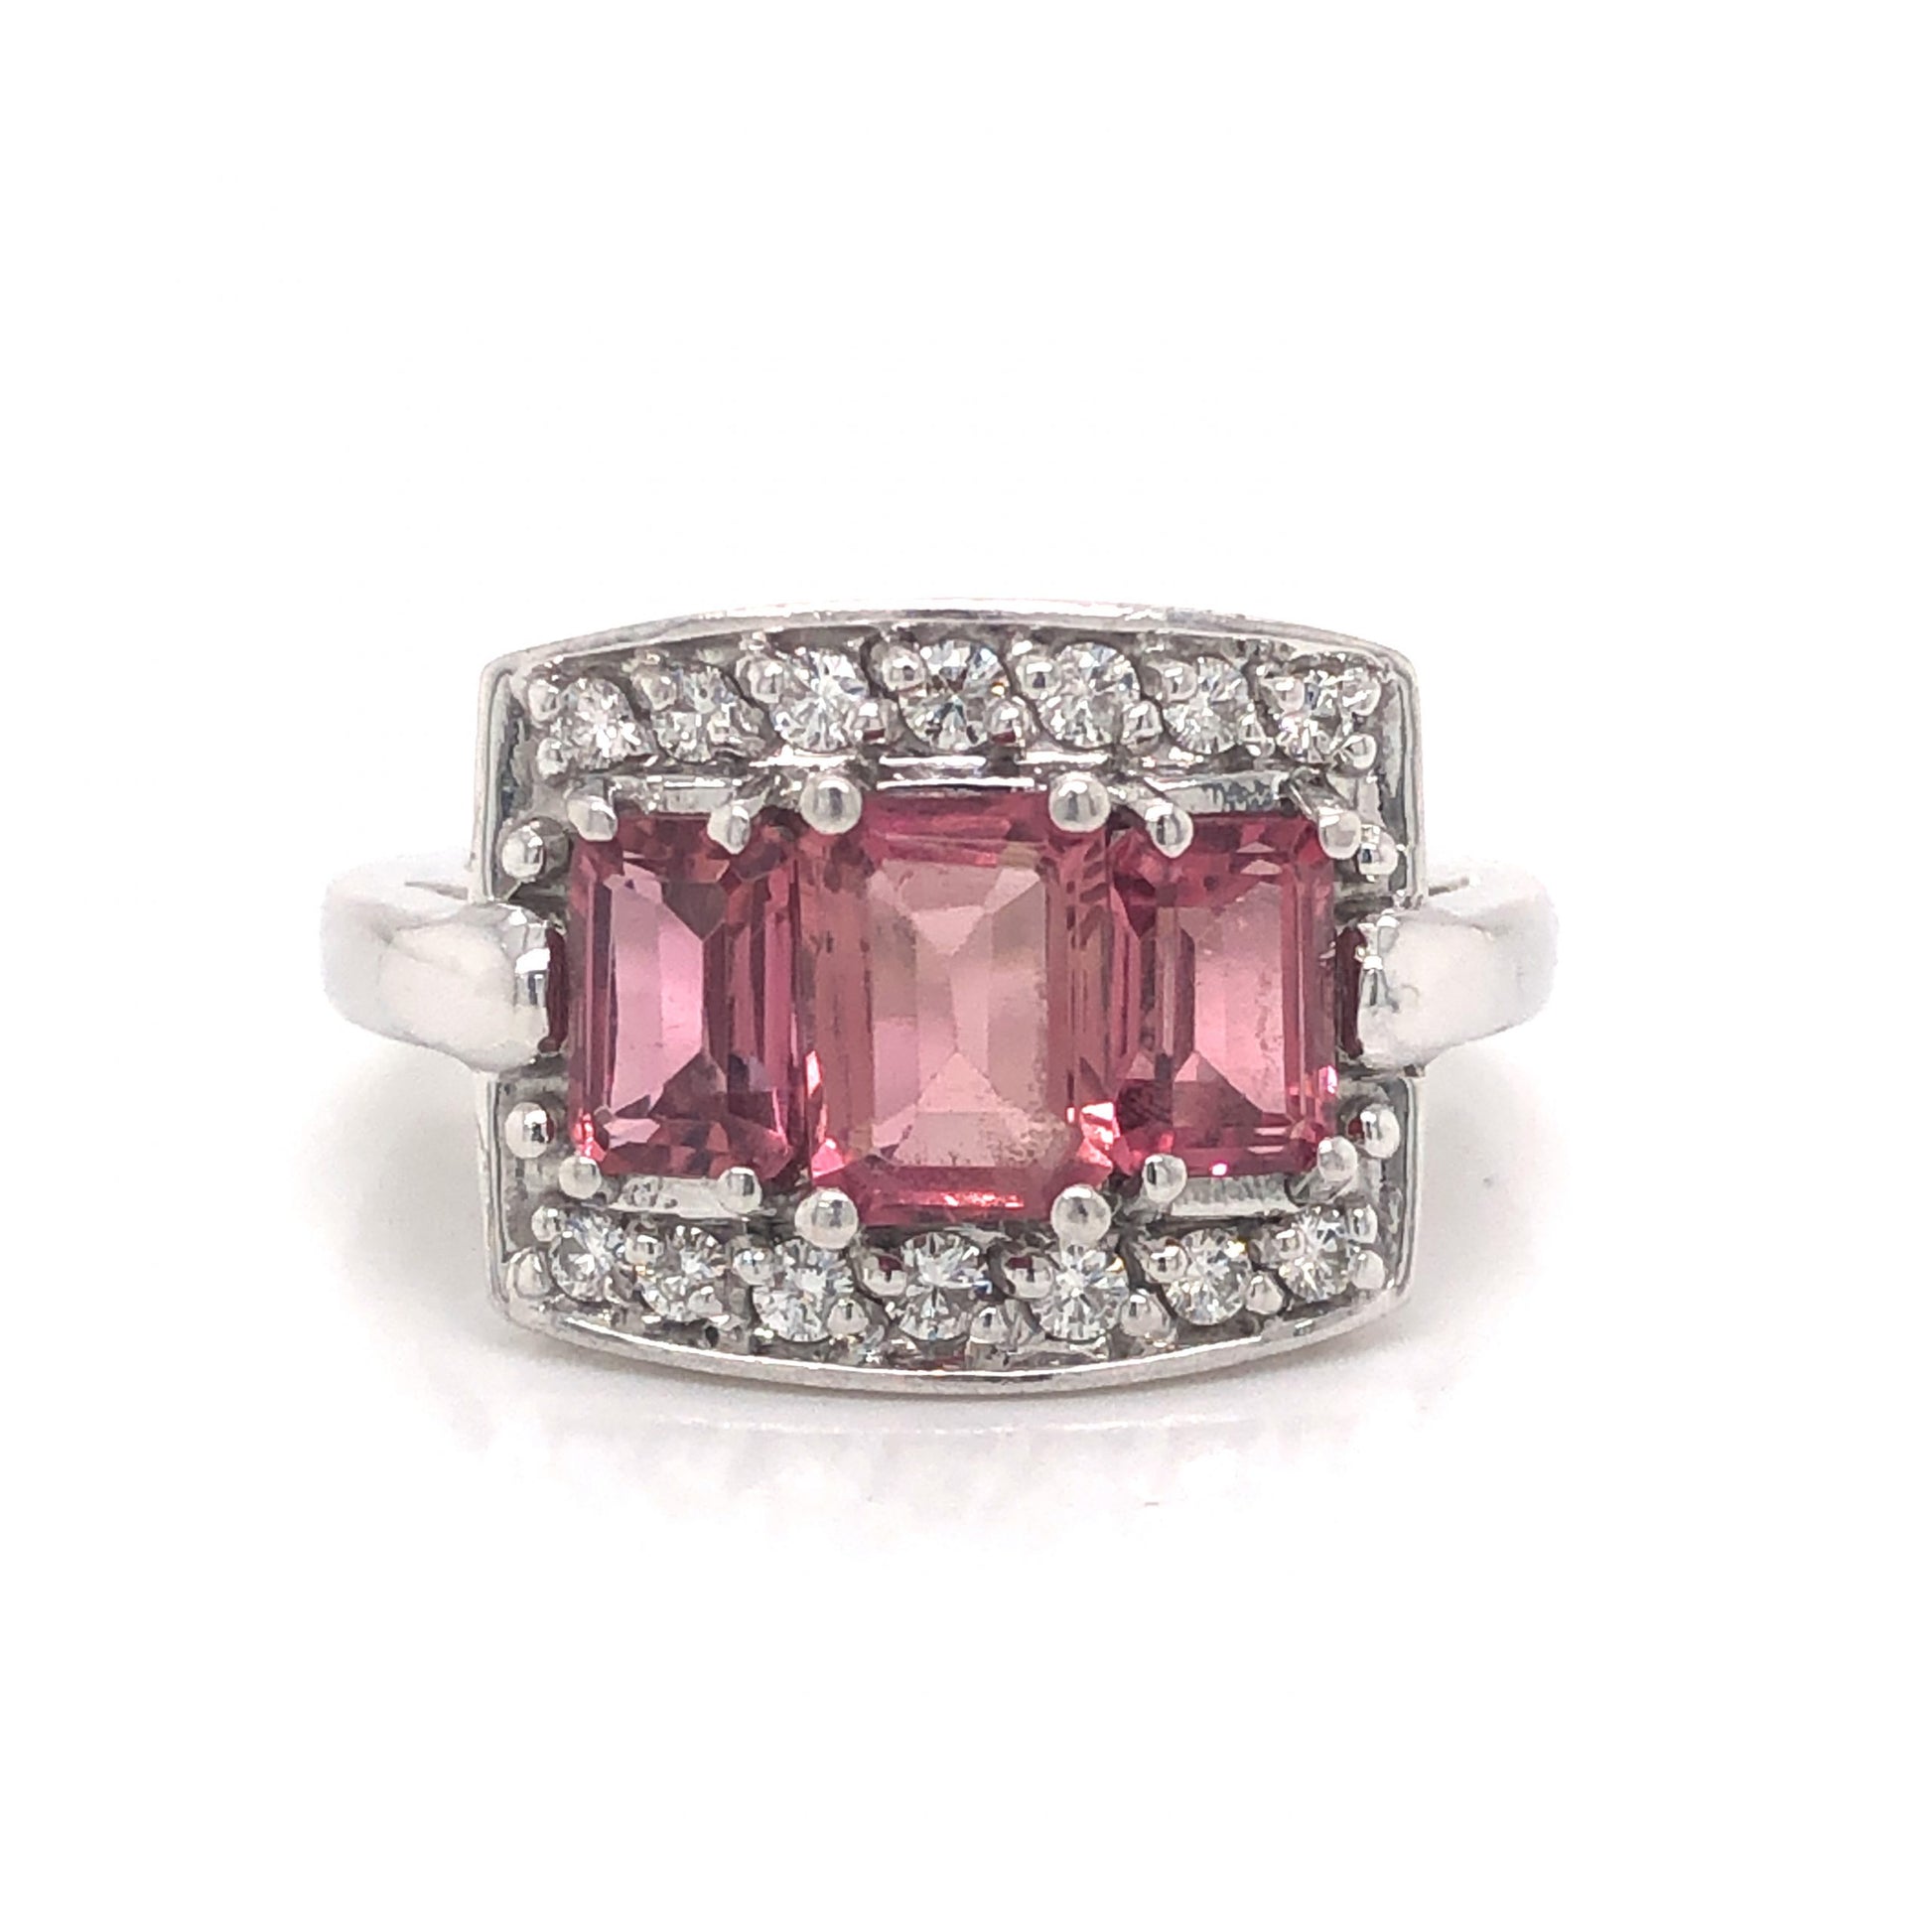 Pink Tourmaline & Diamond Cocktail Ring in 14k White GoldComposition: Platinum Ring Size: 7.25 Total Diamond Weight: .24ct Total Gram Weight: 8.4 g Inscription: 14k
      